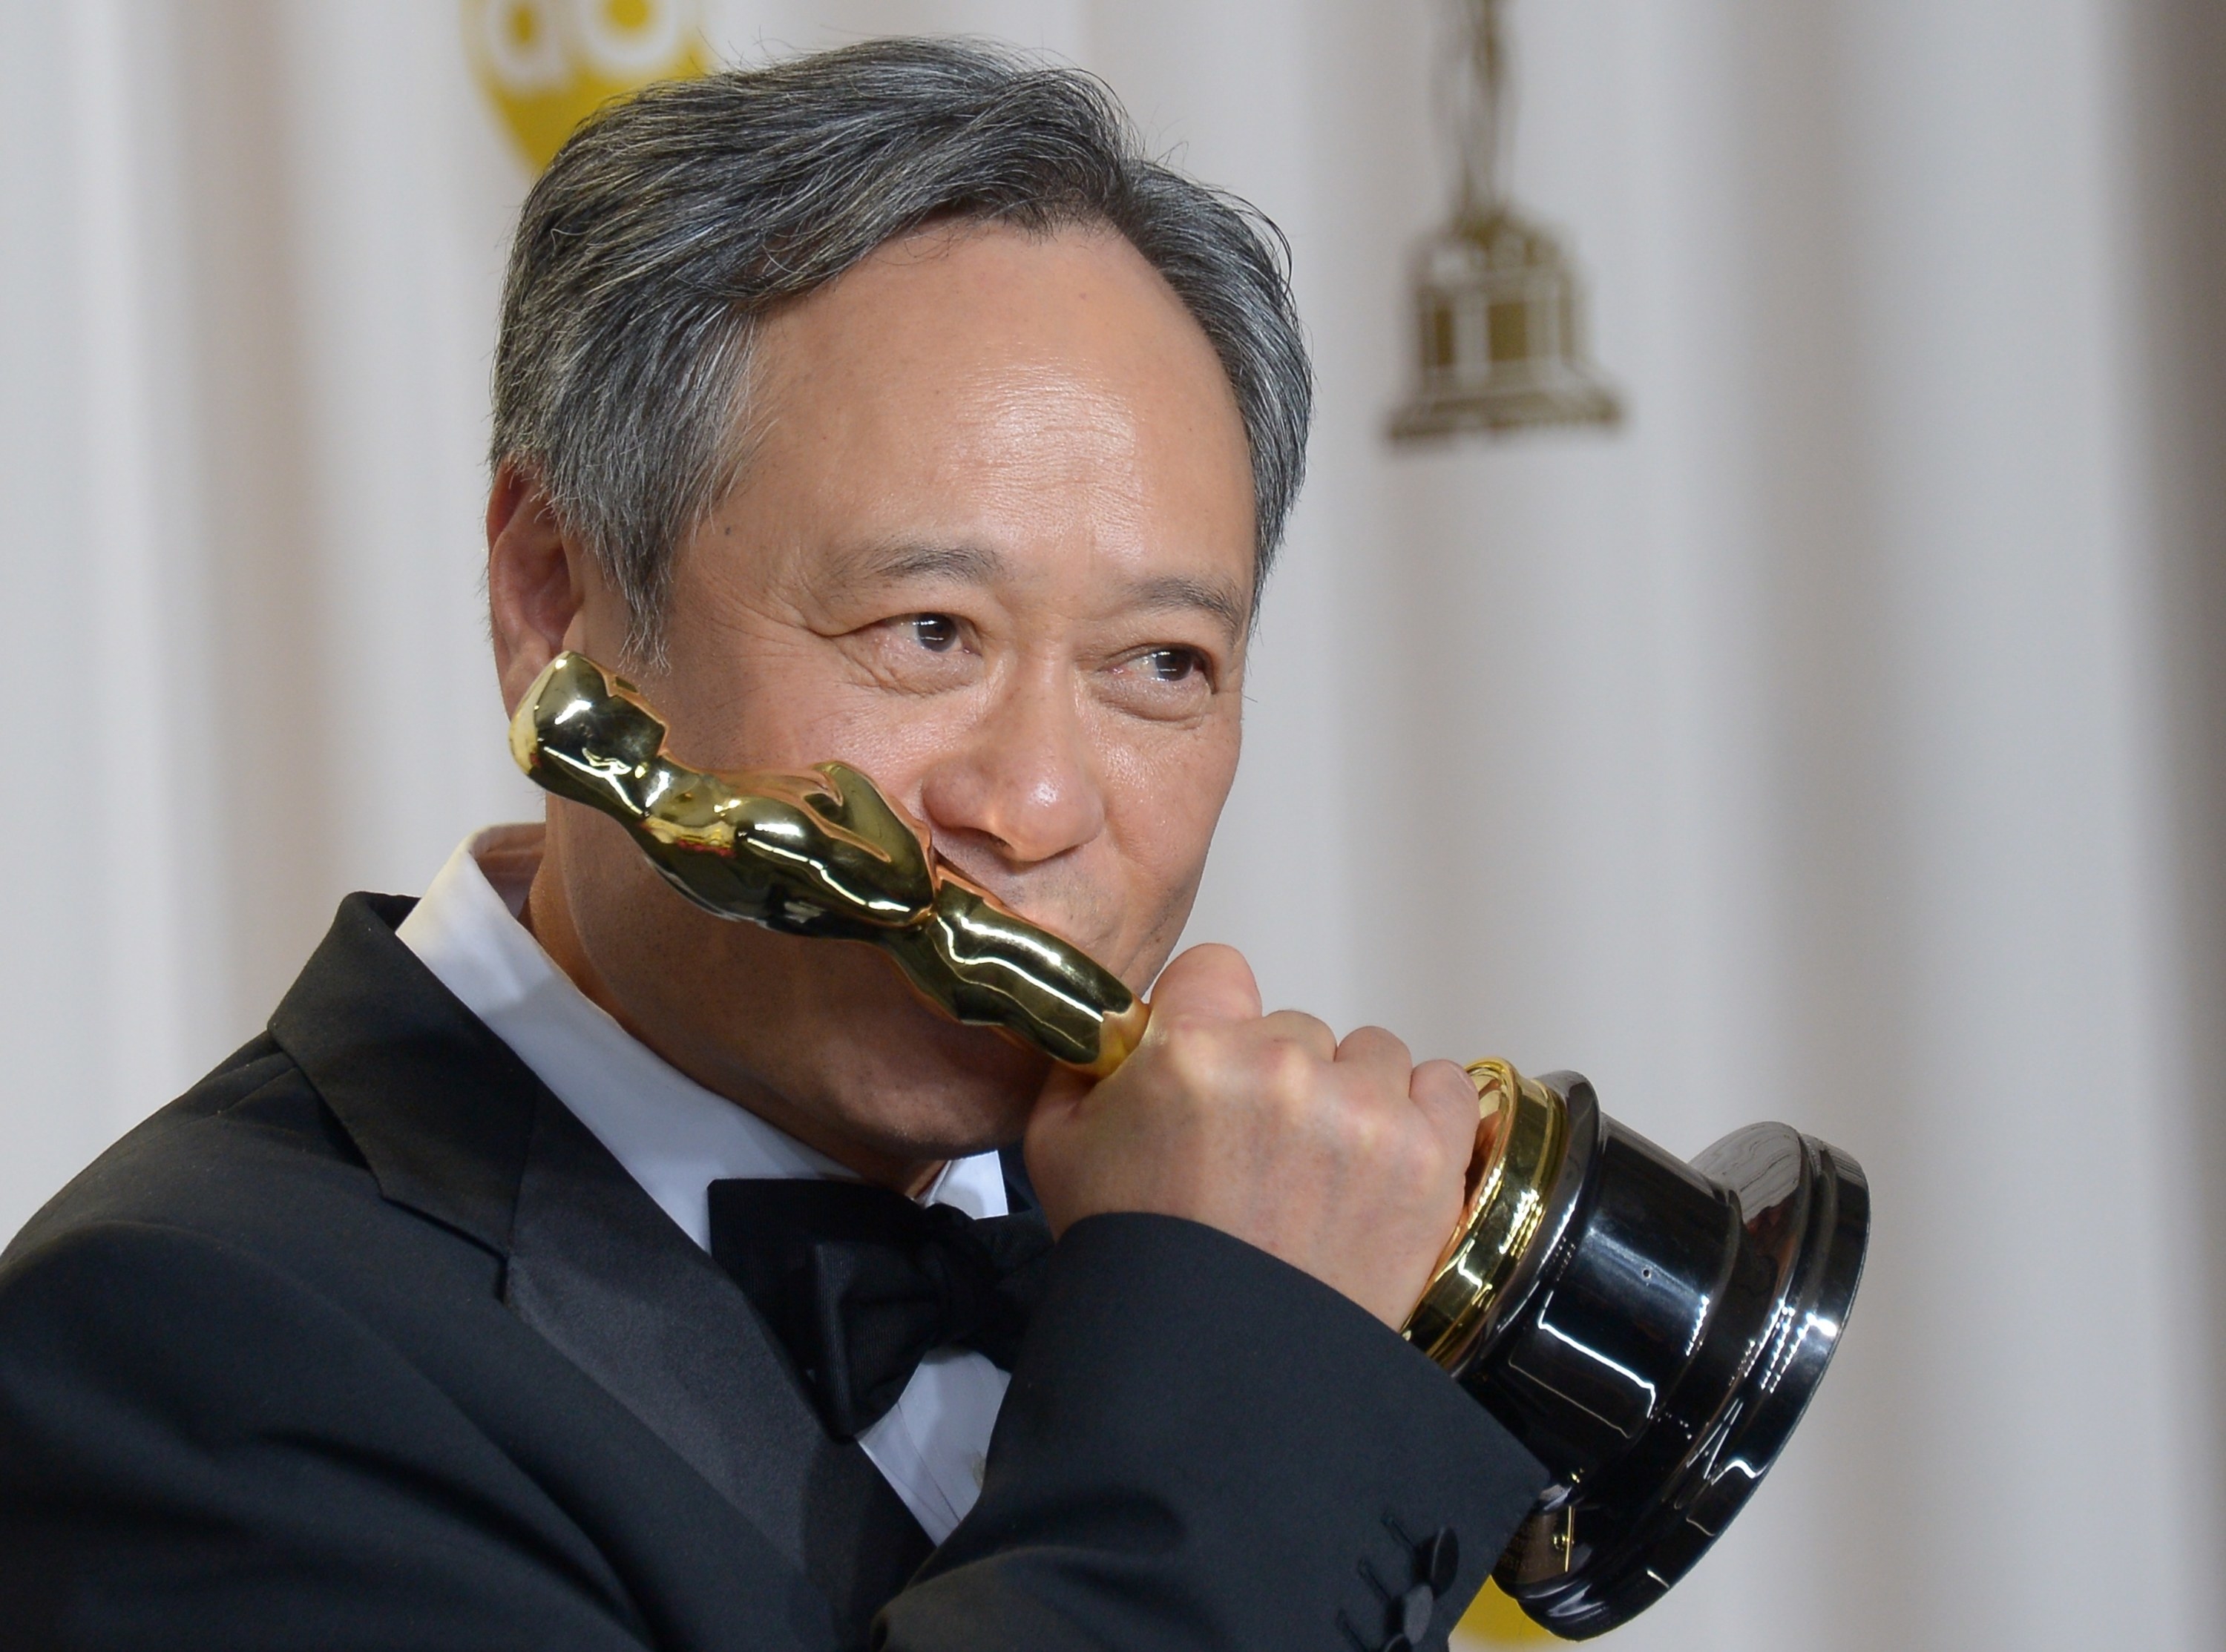 Ang Lee kissing his Oscars statuette